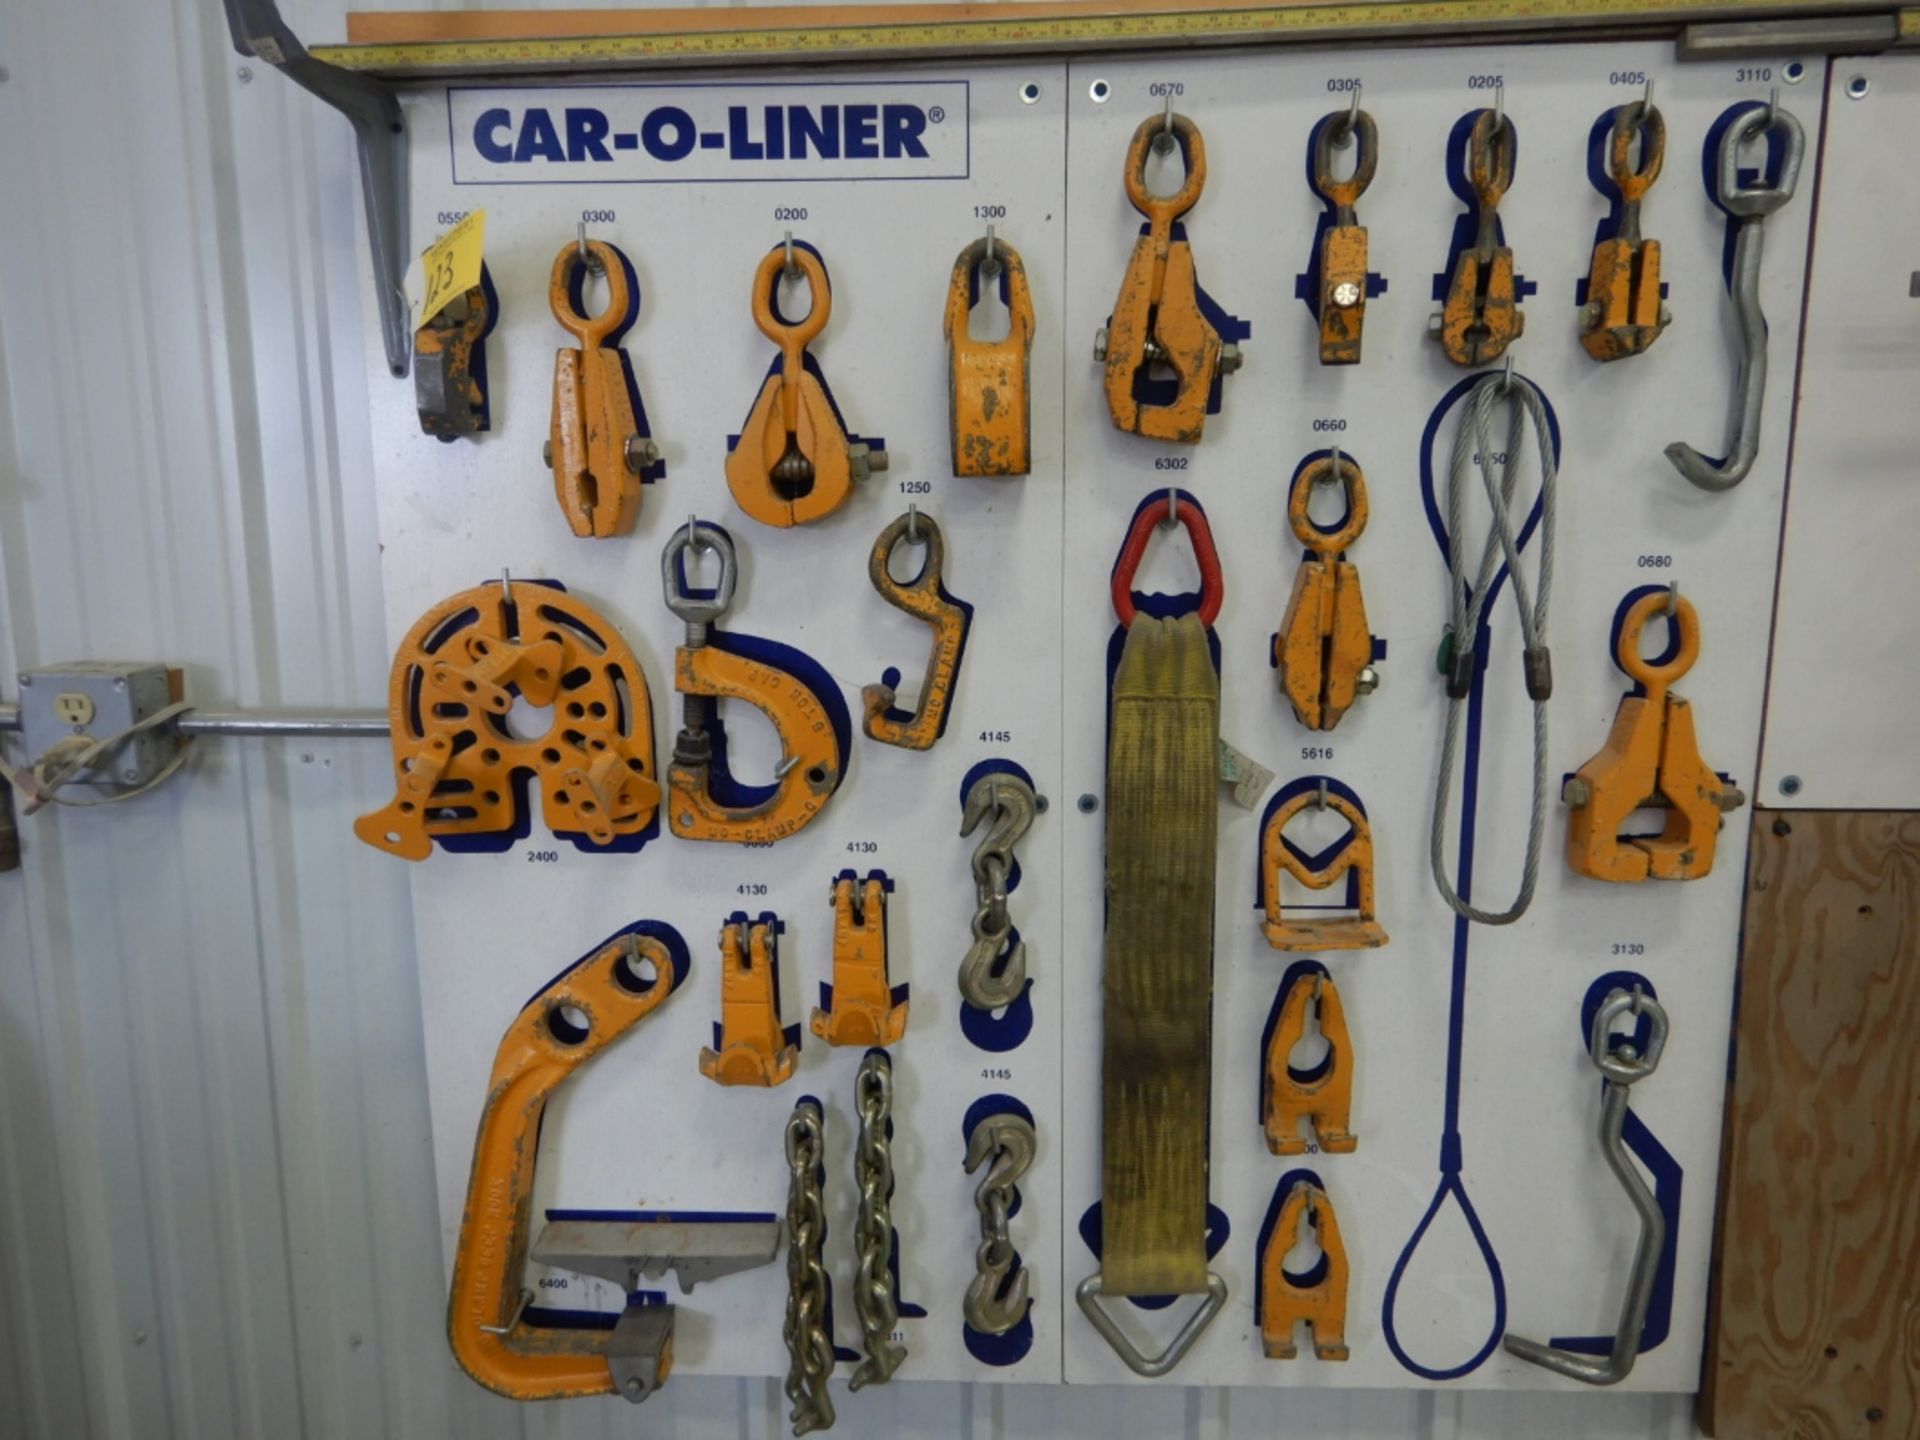 CAR-O-LINER PULLING & HOLD DOWN TOOL BOARD, ALIGN MEASURING GAUGE TOOL BOARD, PULL CLAMPS GAUGES INC - Image 2 of 3